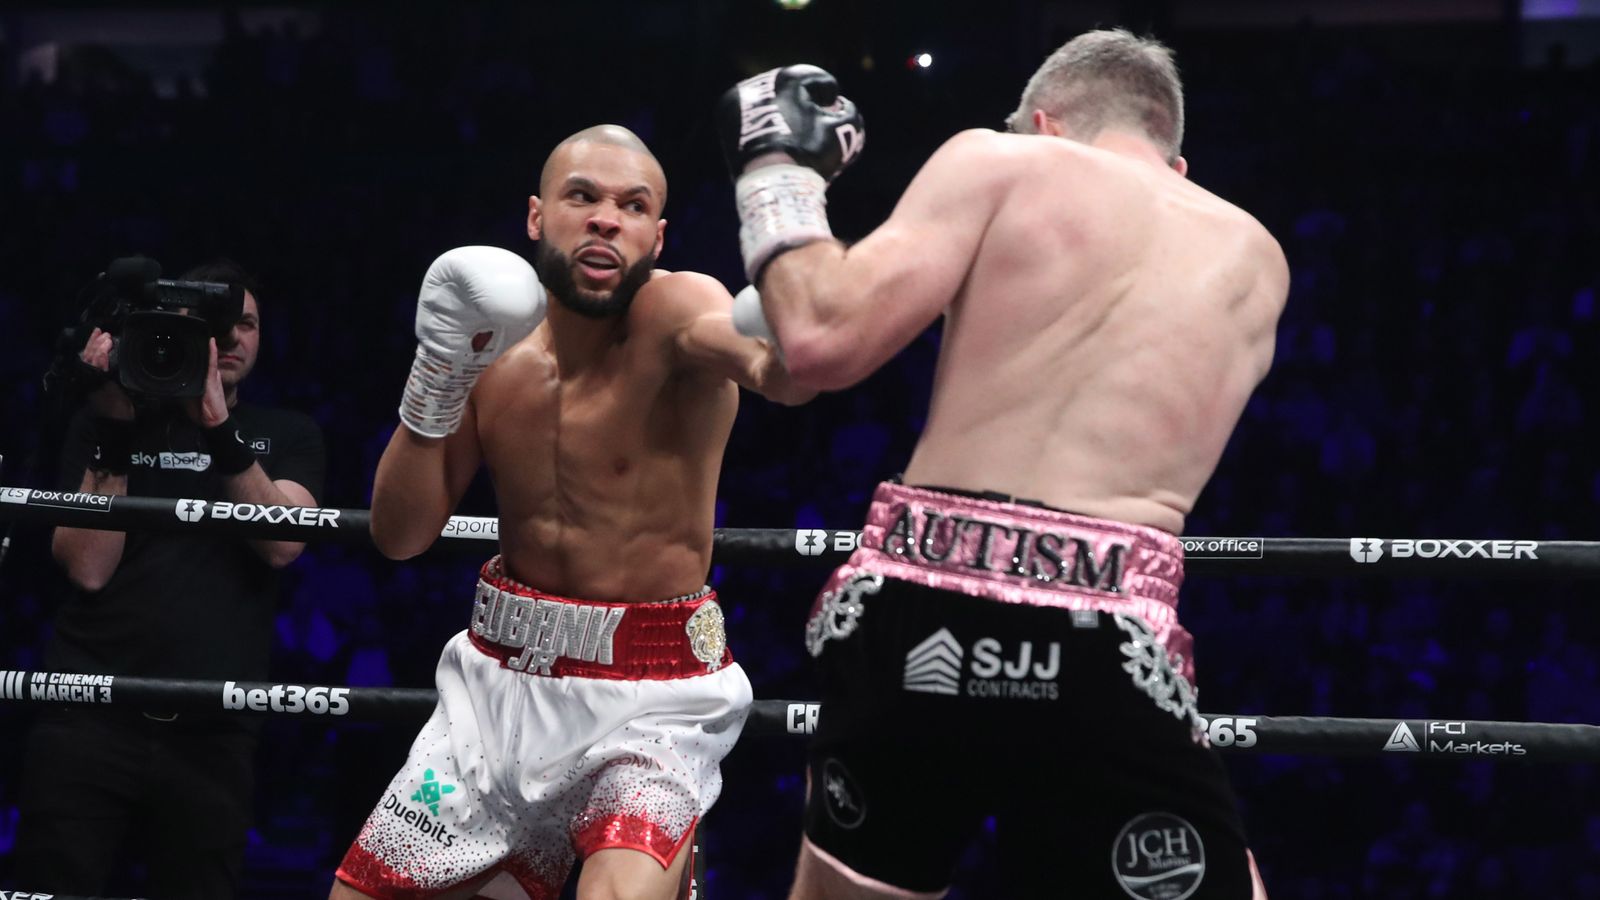 Chris Eubank Jr felt he ‘could have kept going’ against Liam Smith but Carl Froch raises retirement fears after his loss